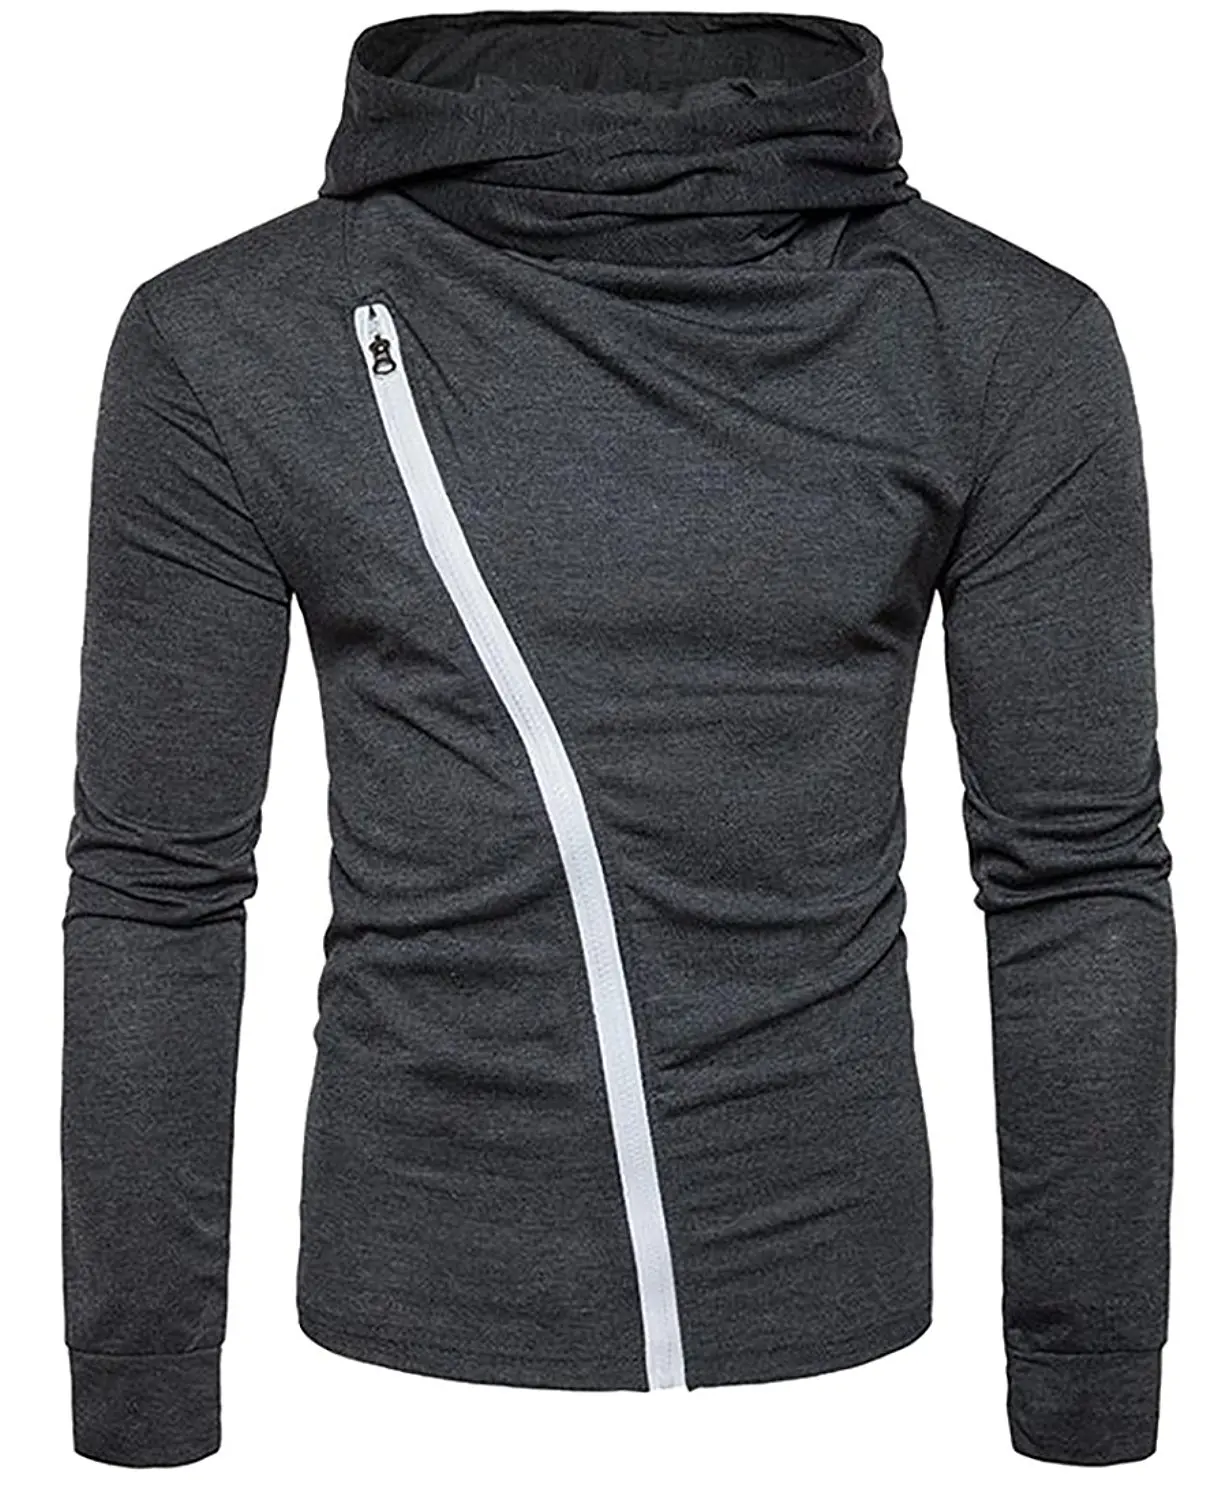 Cheap Mens Cowl Neck Hoodie, find Mens Cowl Neck Hoodie deals on line ...